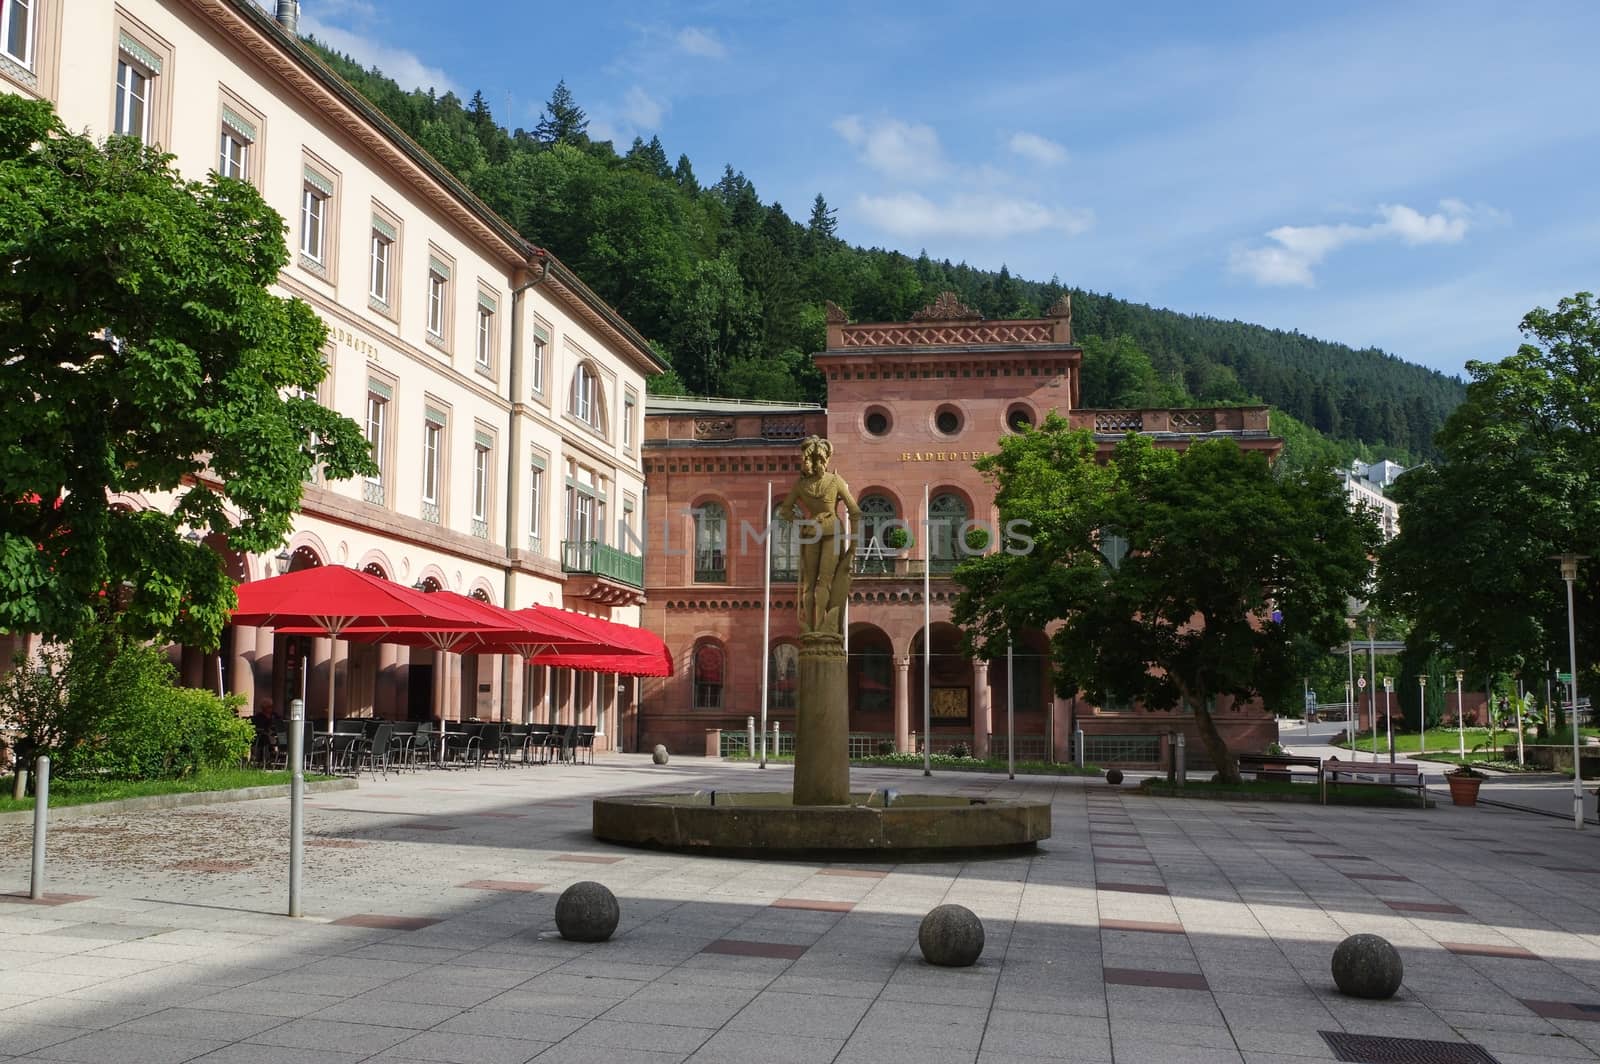 BAD WILDBAD, GERMANY - JUNE 28, 2015: the square Kurplatz, Palais Thermal former Badhotel, Baden-Wuerttemberg, Schwarzwald Black Forest by evolutionnow